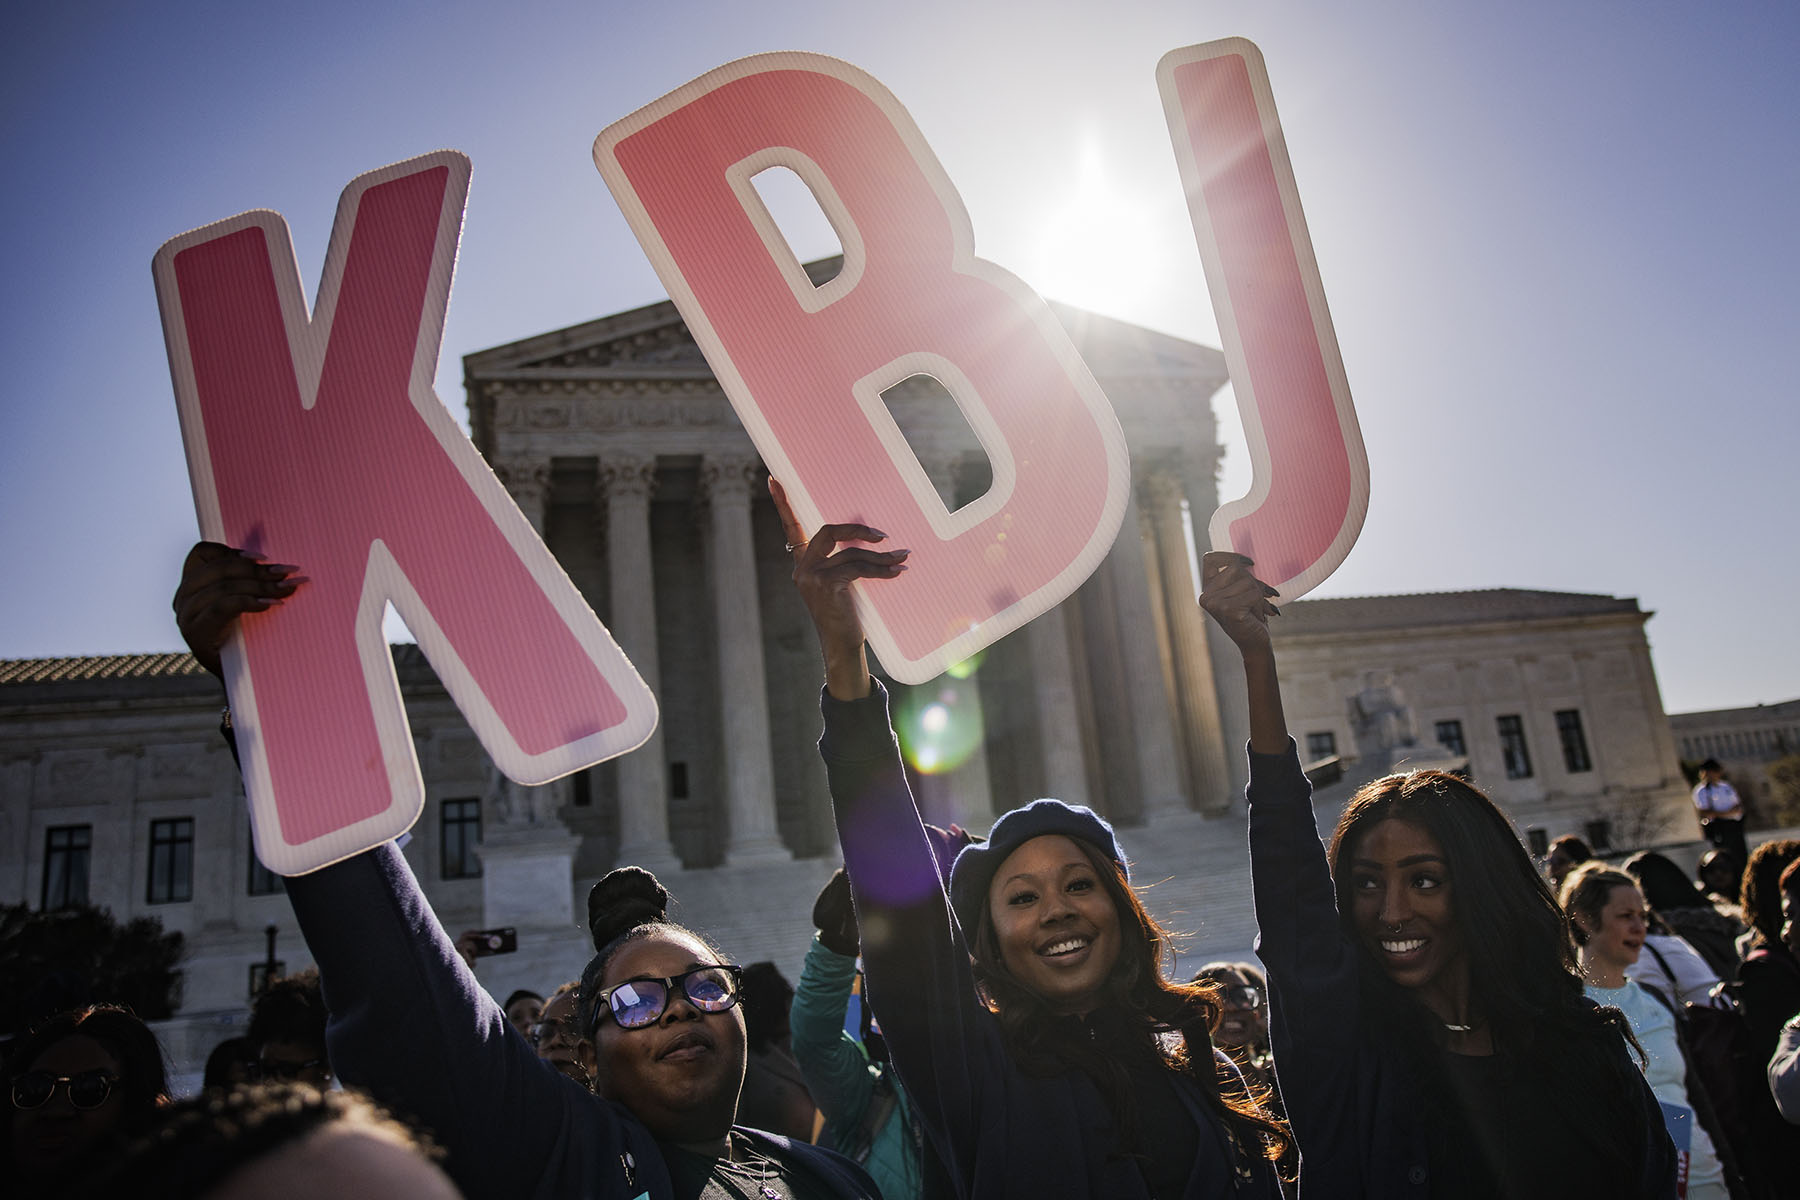 Law students from Southern University Law Center hold up the letters "KBJ" in front of the Supreme Court.